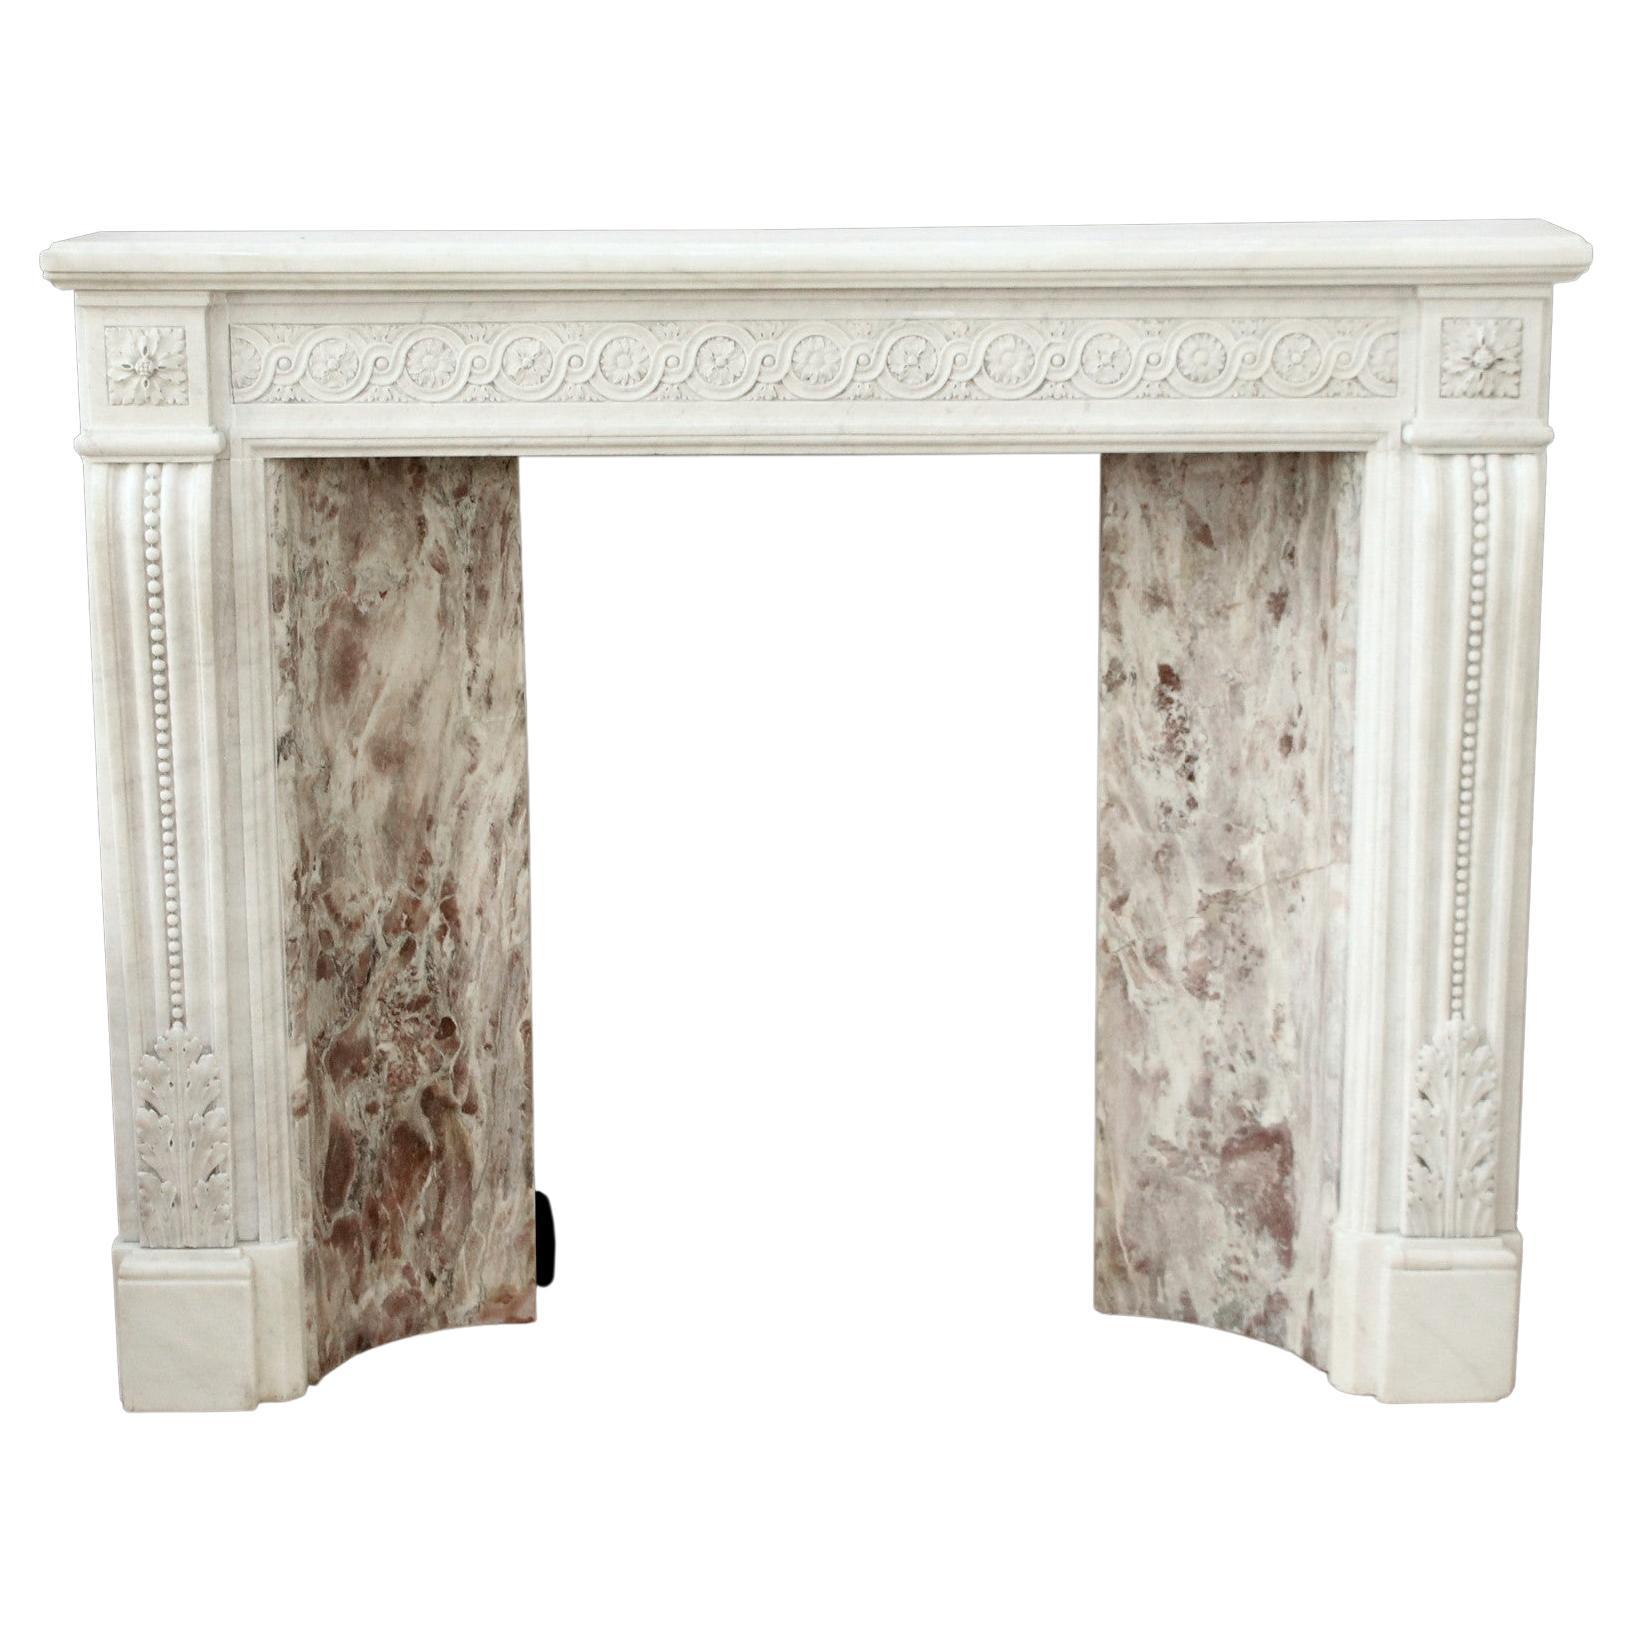 Petite antique 1880s white Victorian Carrara marble mantel with decorative hand carved floral details. Features beading on the legs and acanthus leaves on the bottom. Includes the original multicolored insert shown. Please note, this item is located